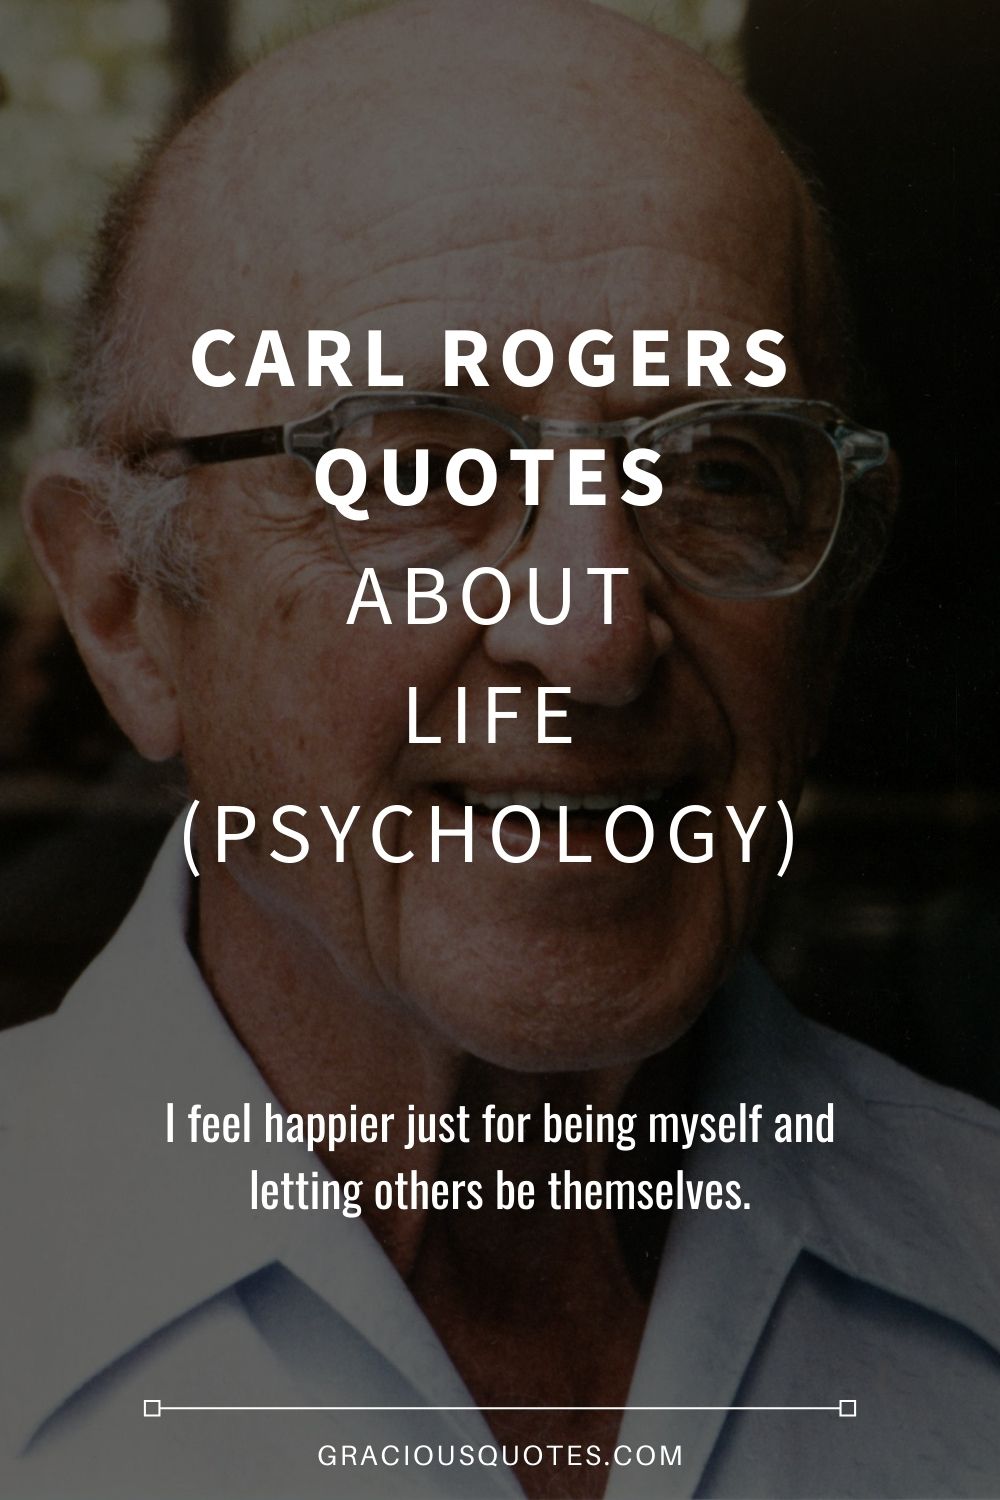 33 Carl Rogers Quotes About Life Psychology